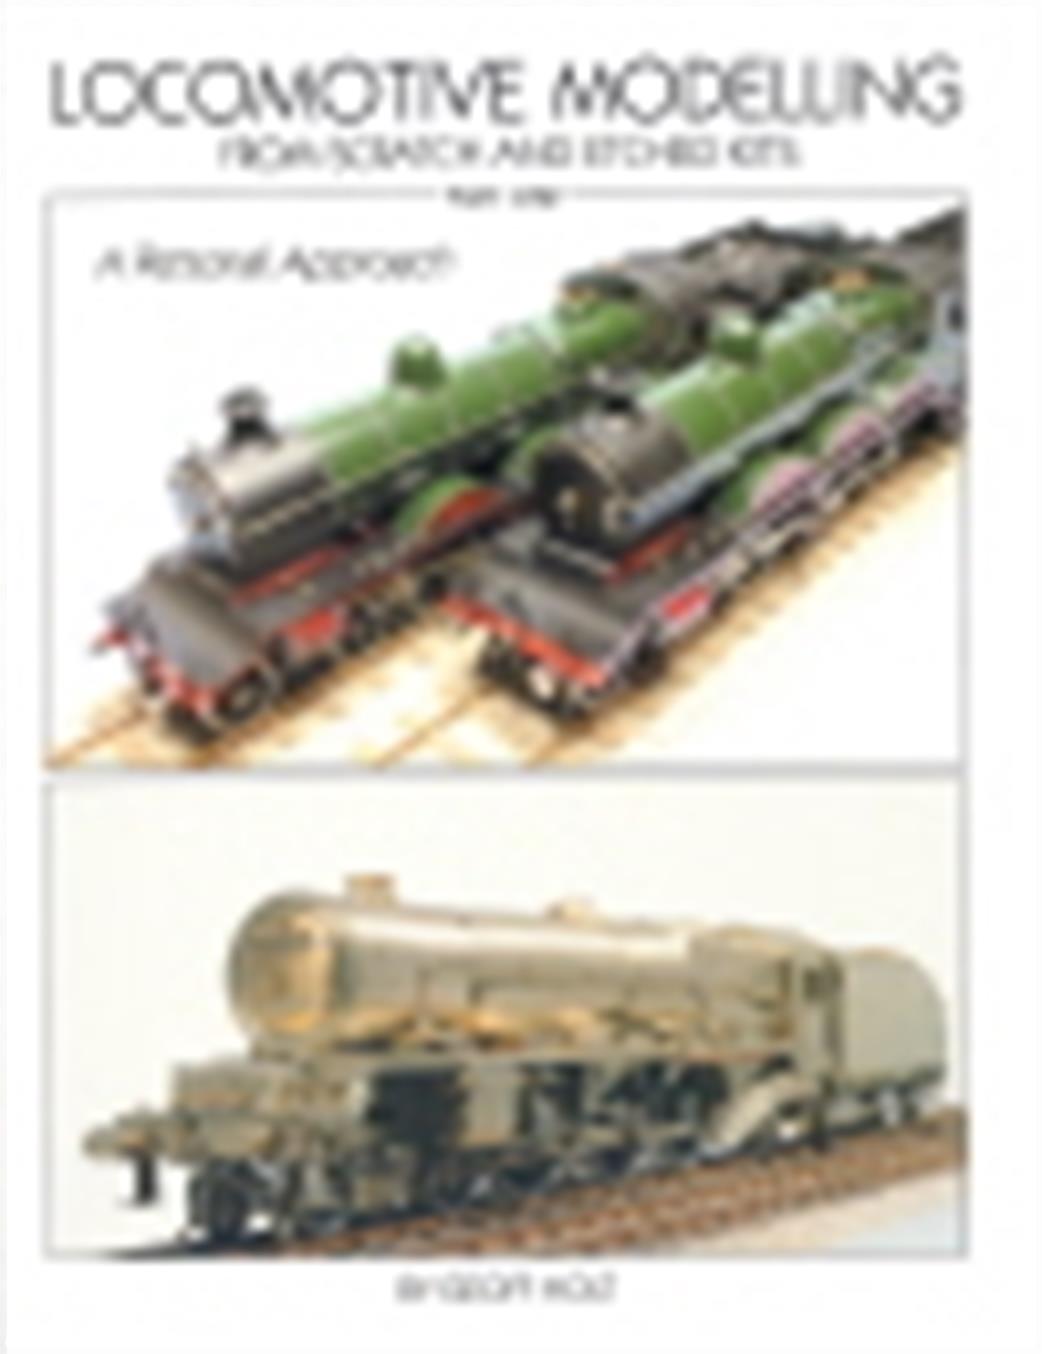 Wild Swan  9781908763013 Locomotive Modelling from Scratch & Etched Kits Part One by Geoff Holt